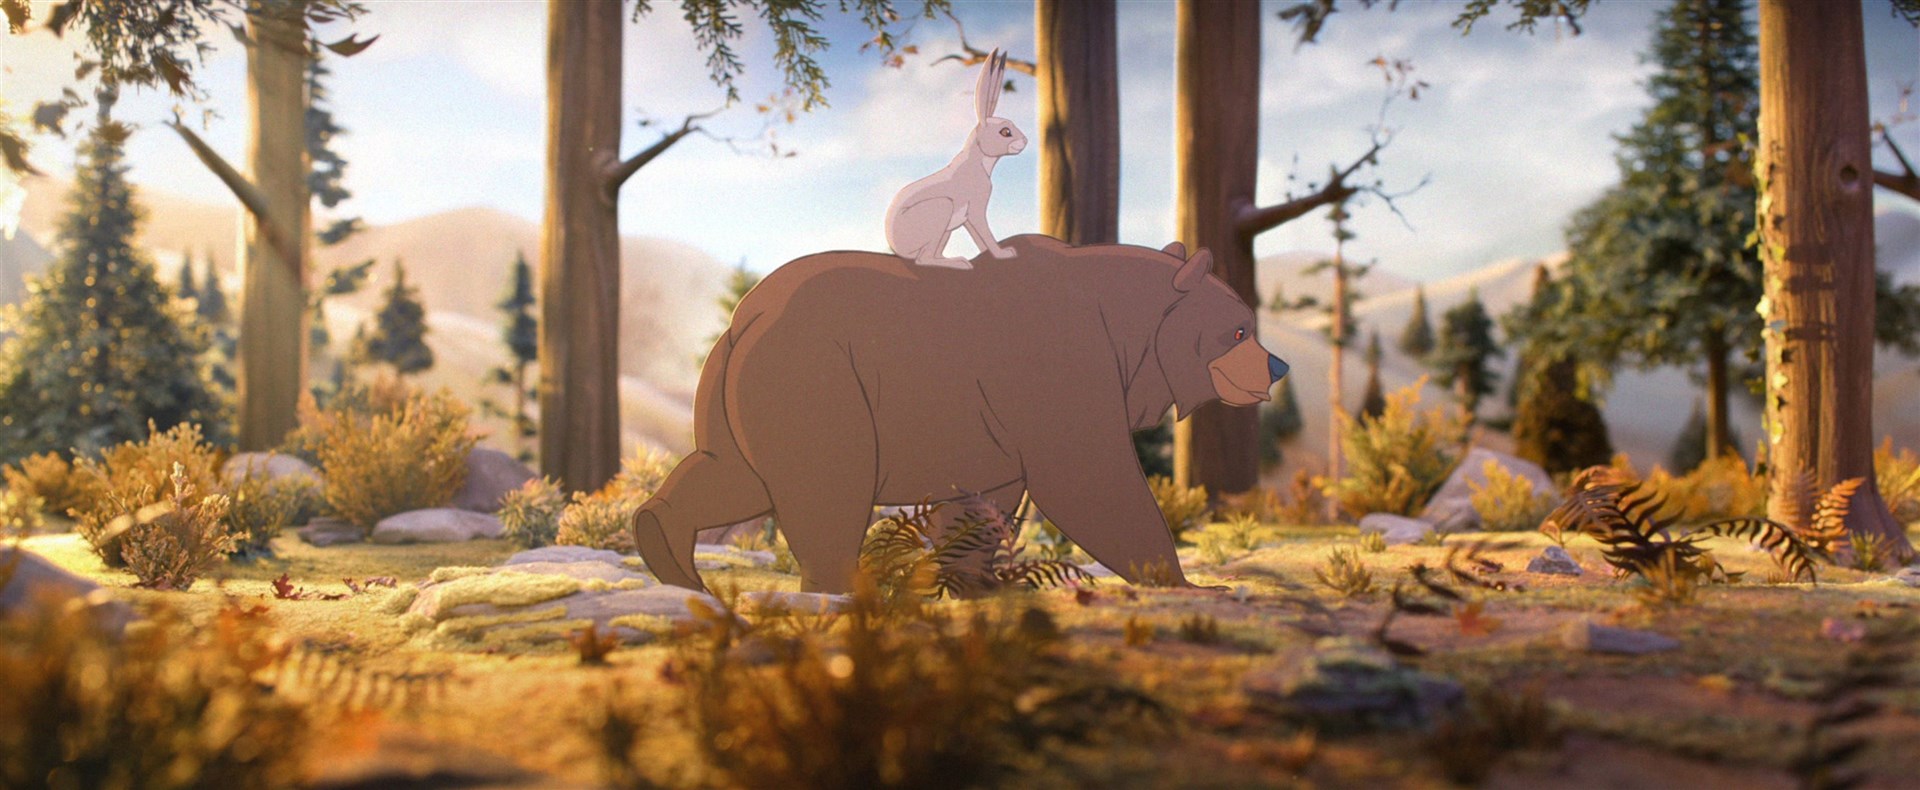 A scene from The Bear And The Hare advert (John Lewis/PA)